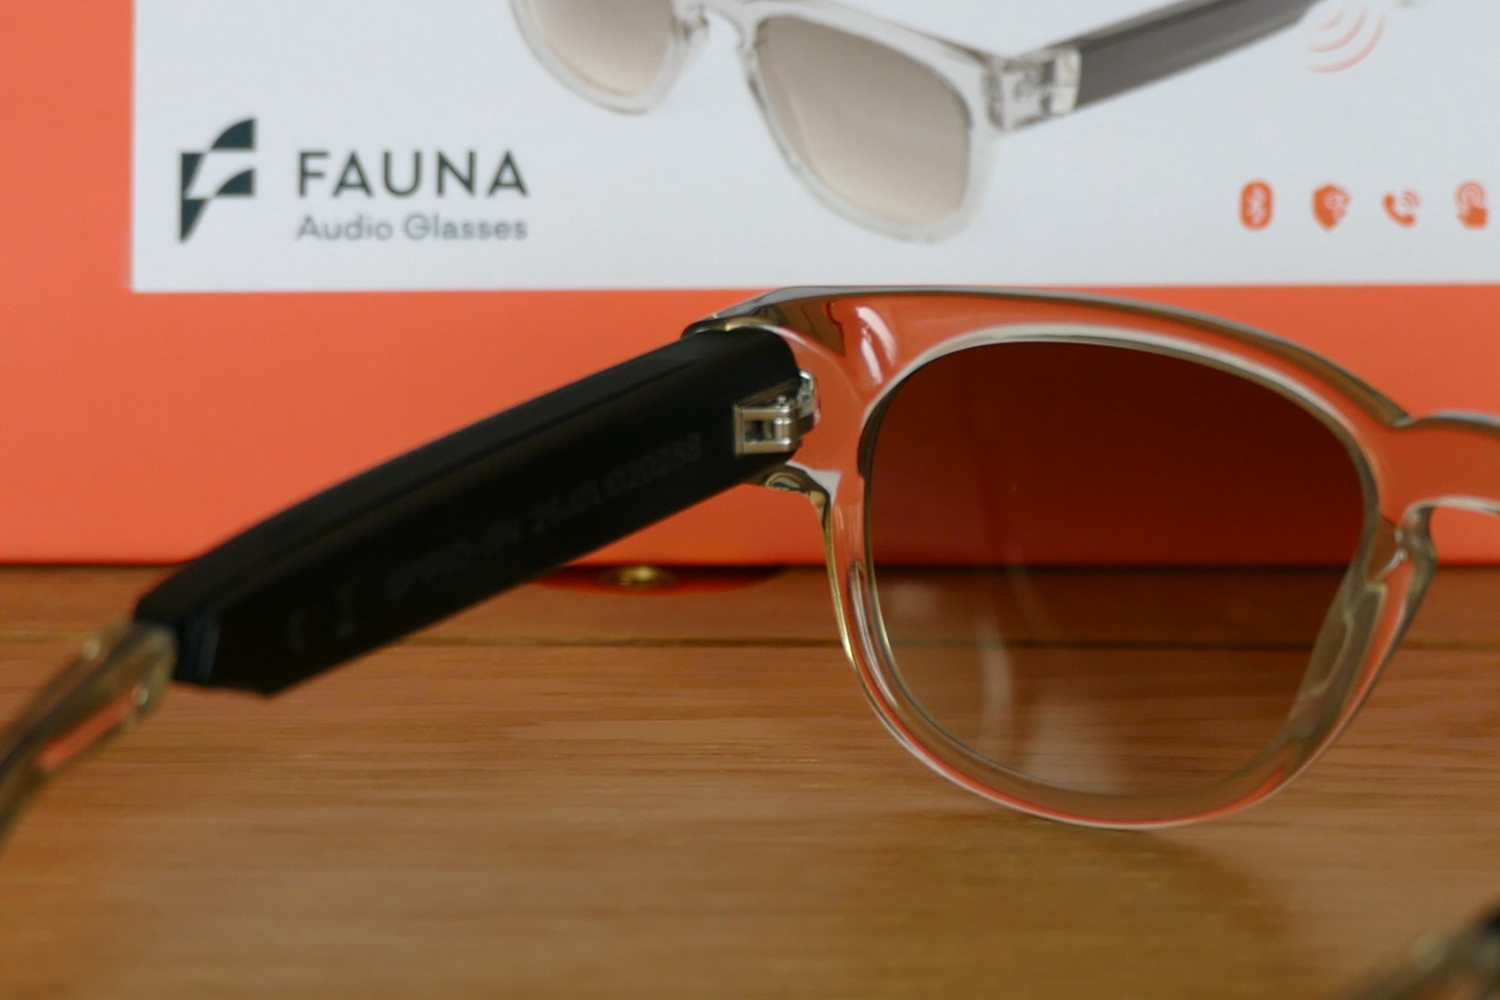 bluetooth audio smart glasses are a waste of space on your face fauna inside arm